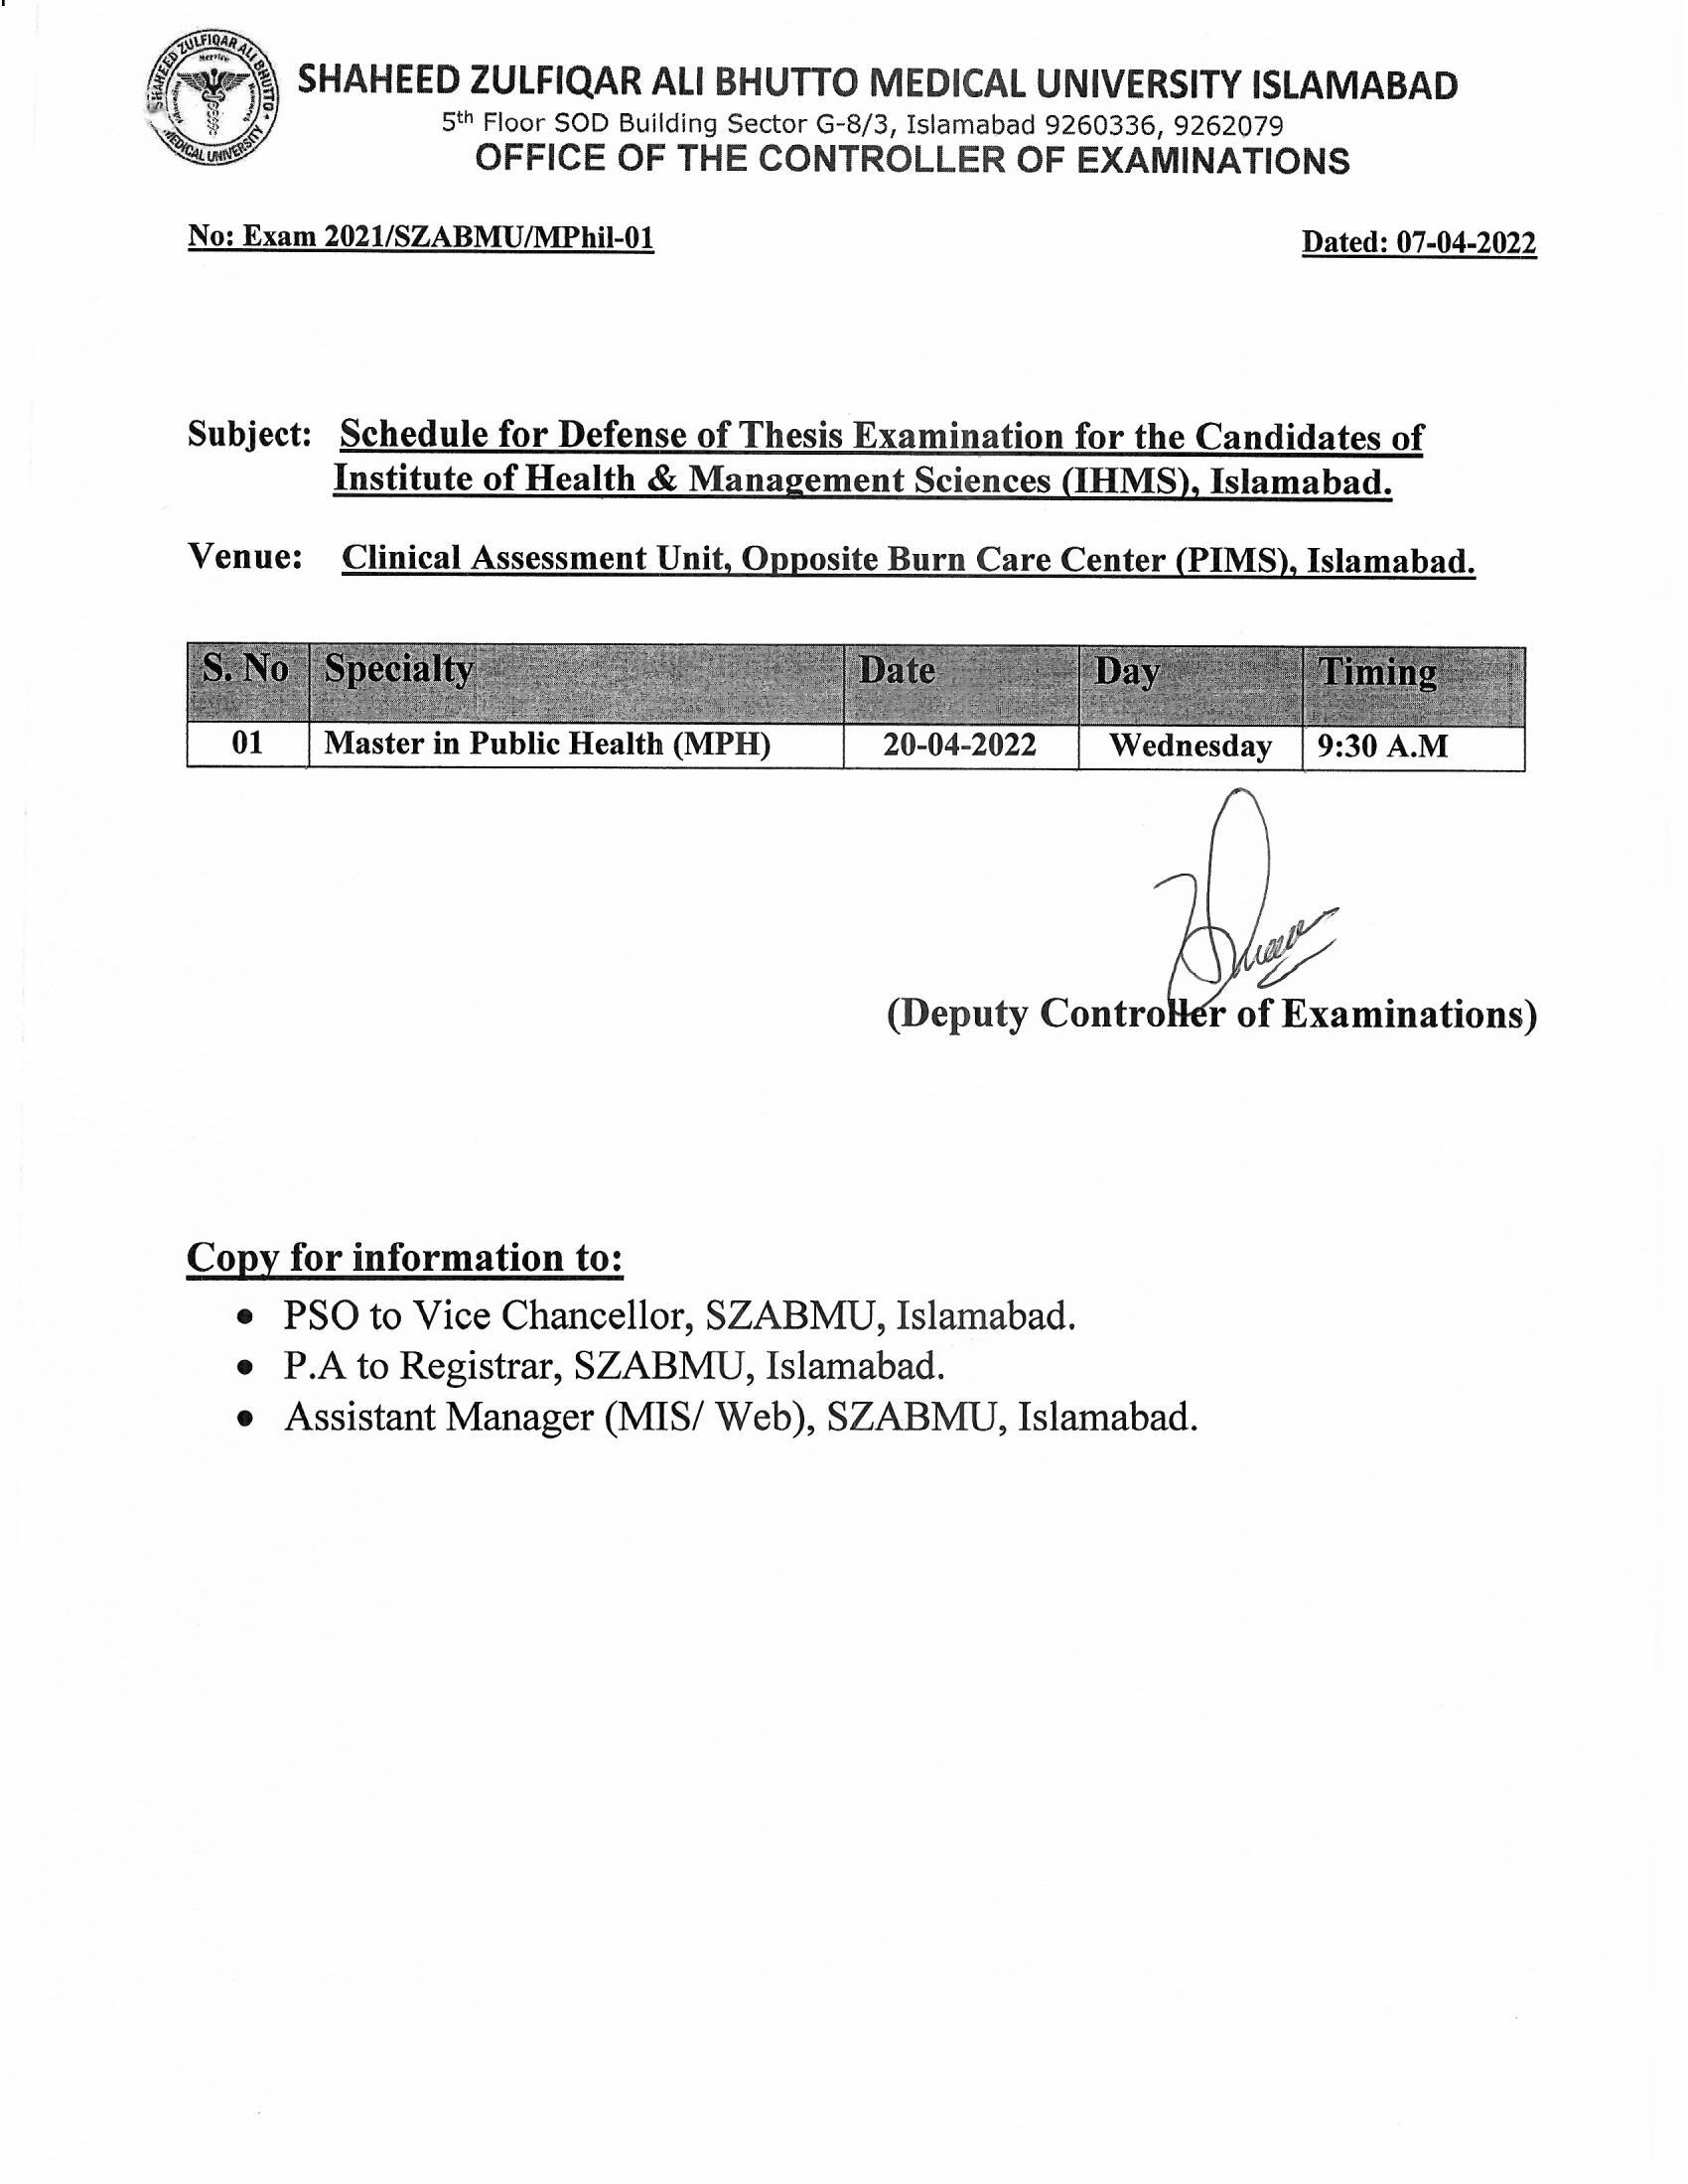 Schedule for Defense of Thesis Examinations of IHMS